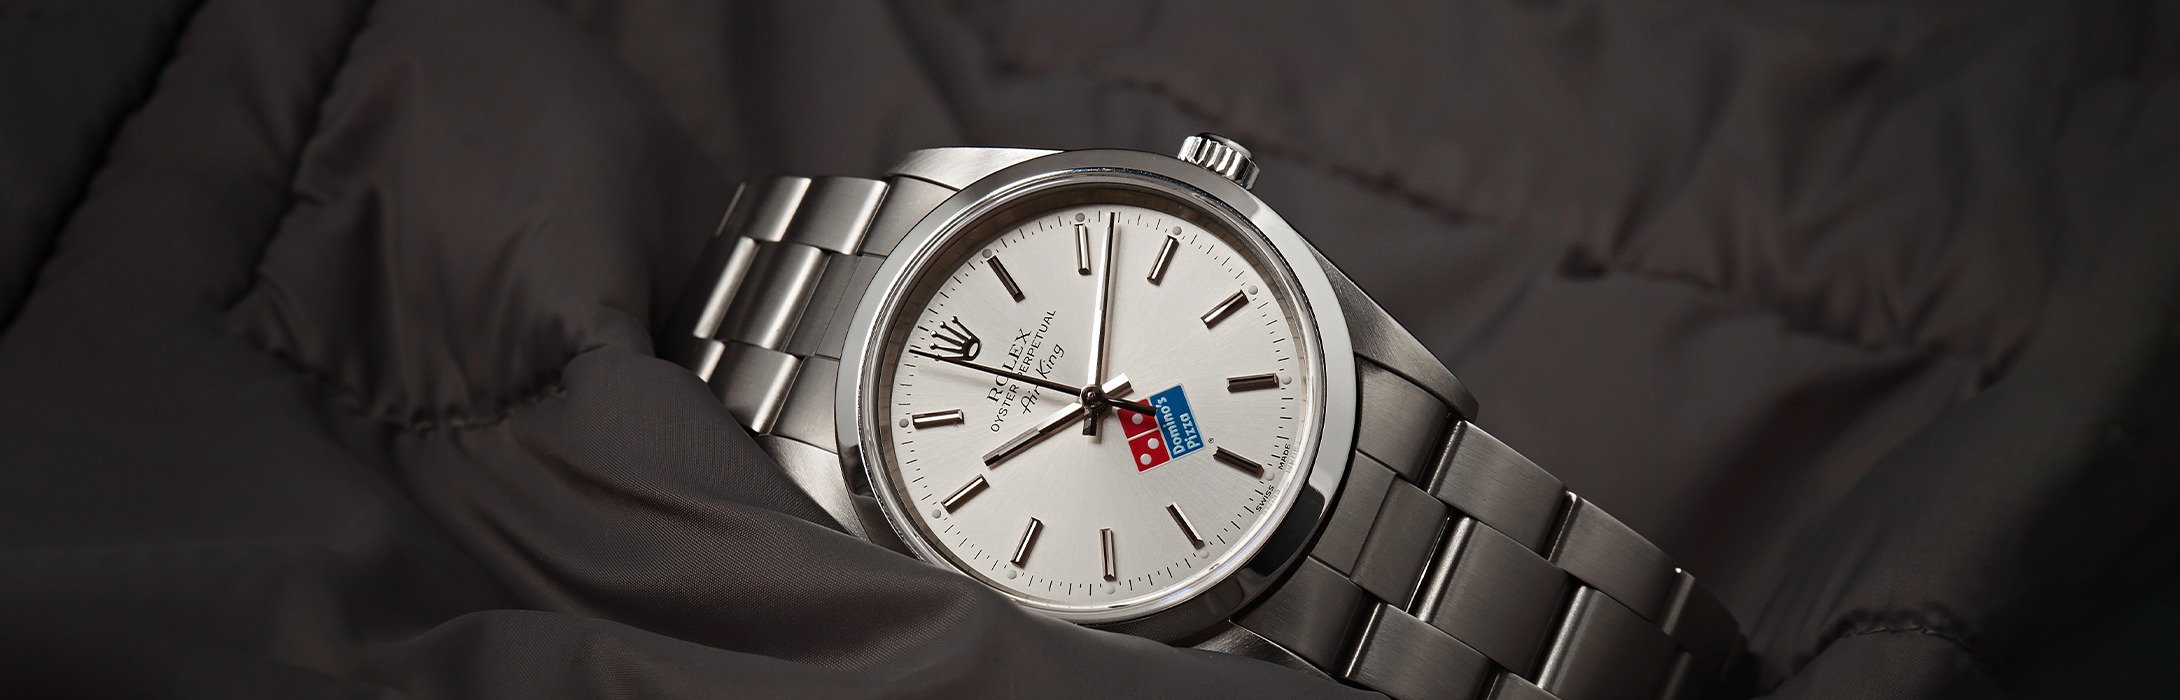 Domino’s Rolex Air-King Watches: Everything You Need to Know